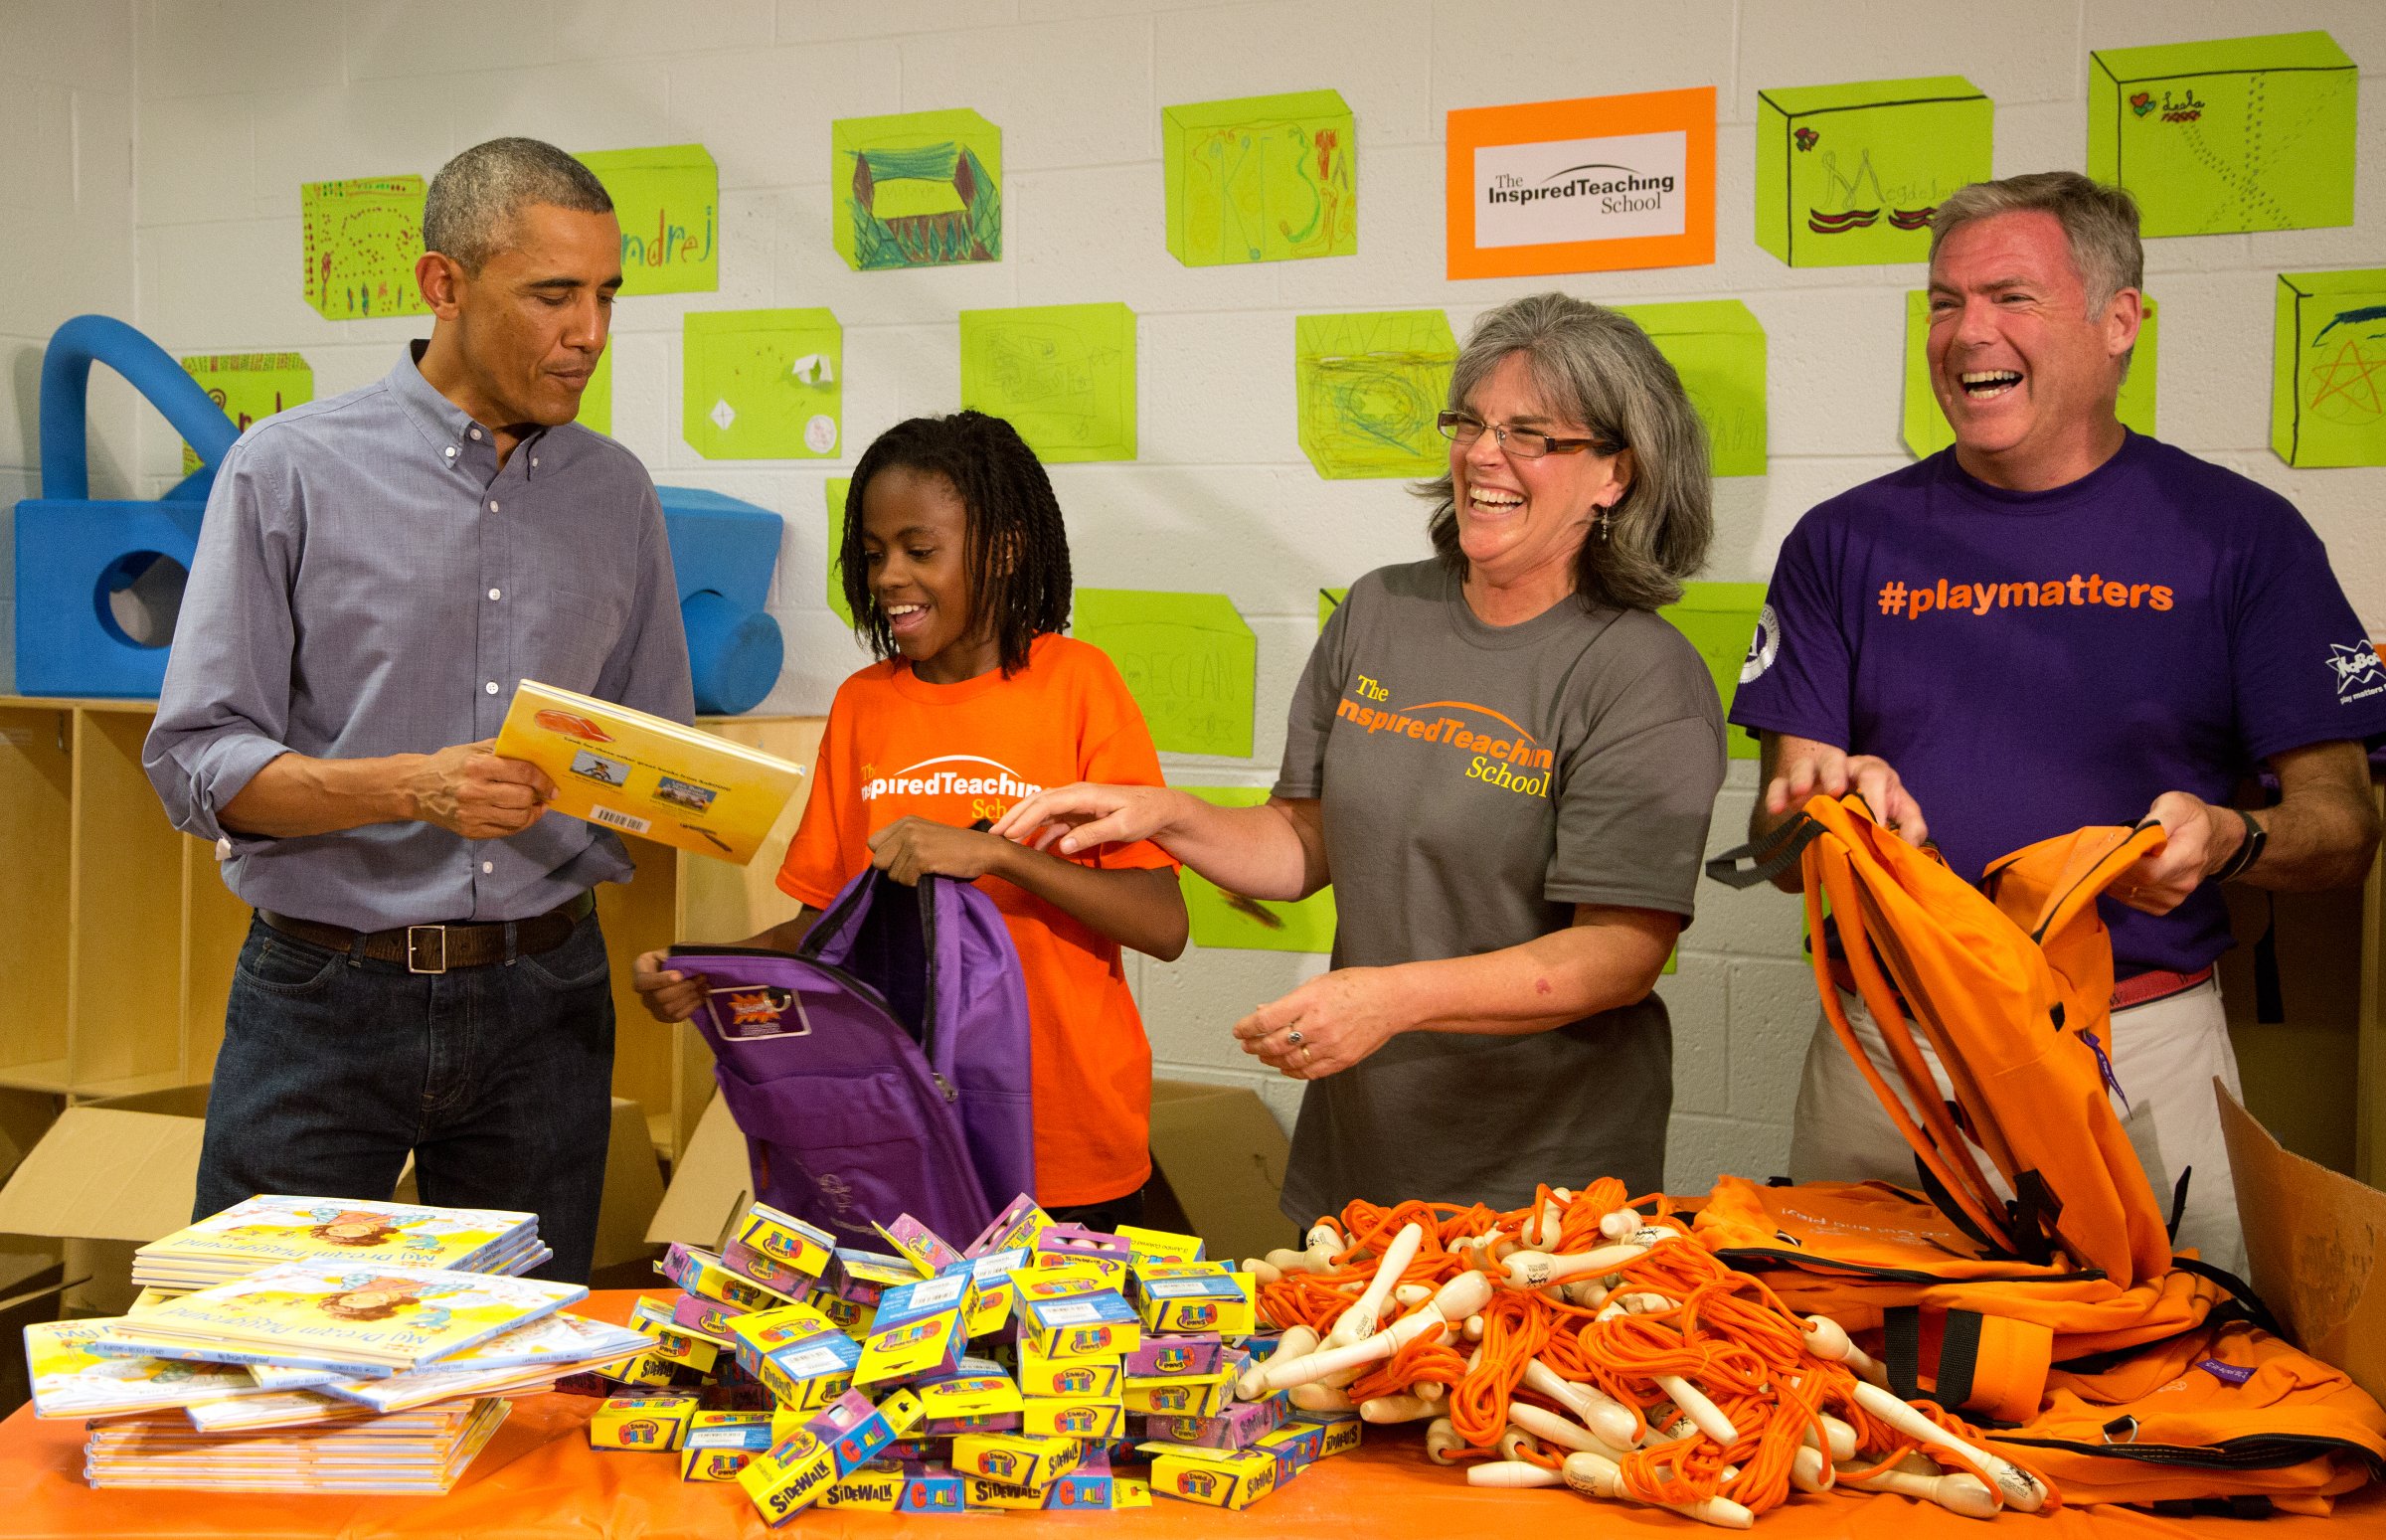 President Barack Obama and volunteers take part in a service project at the Inspired Teaching School in Washington, D.C. on September 11, 2014.